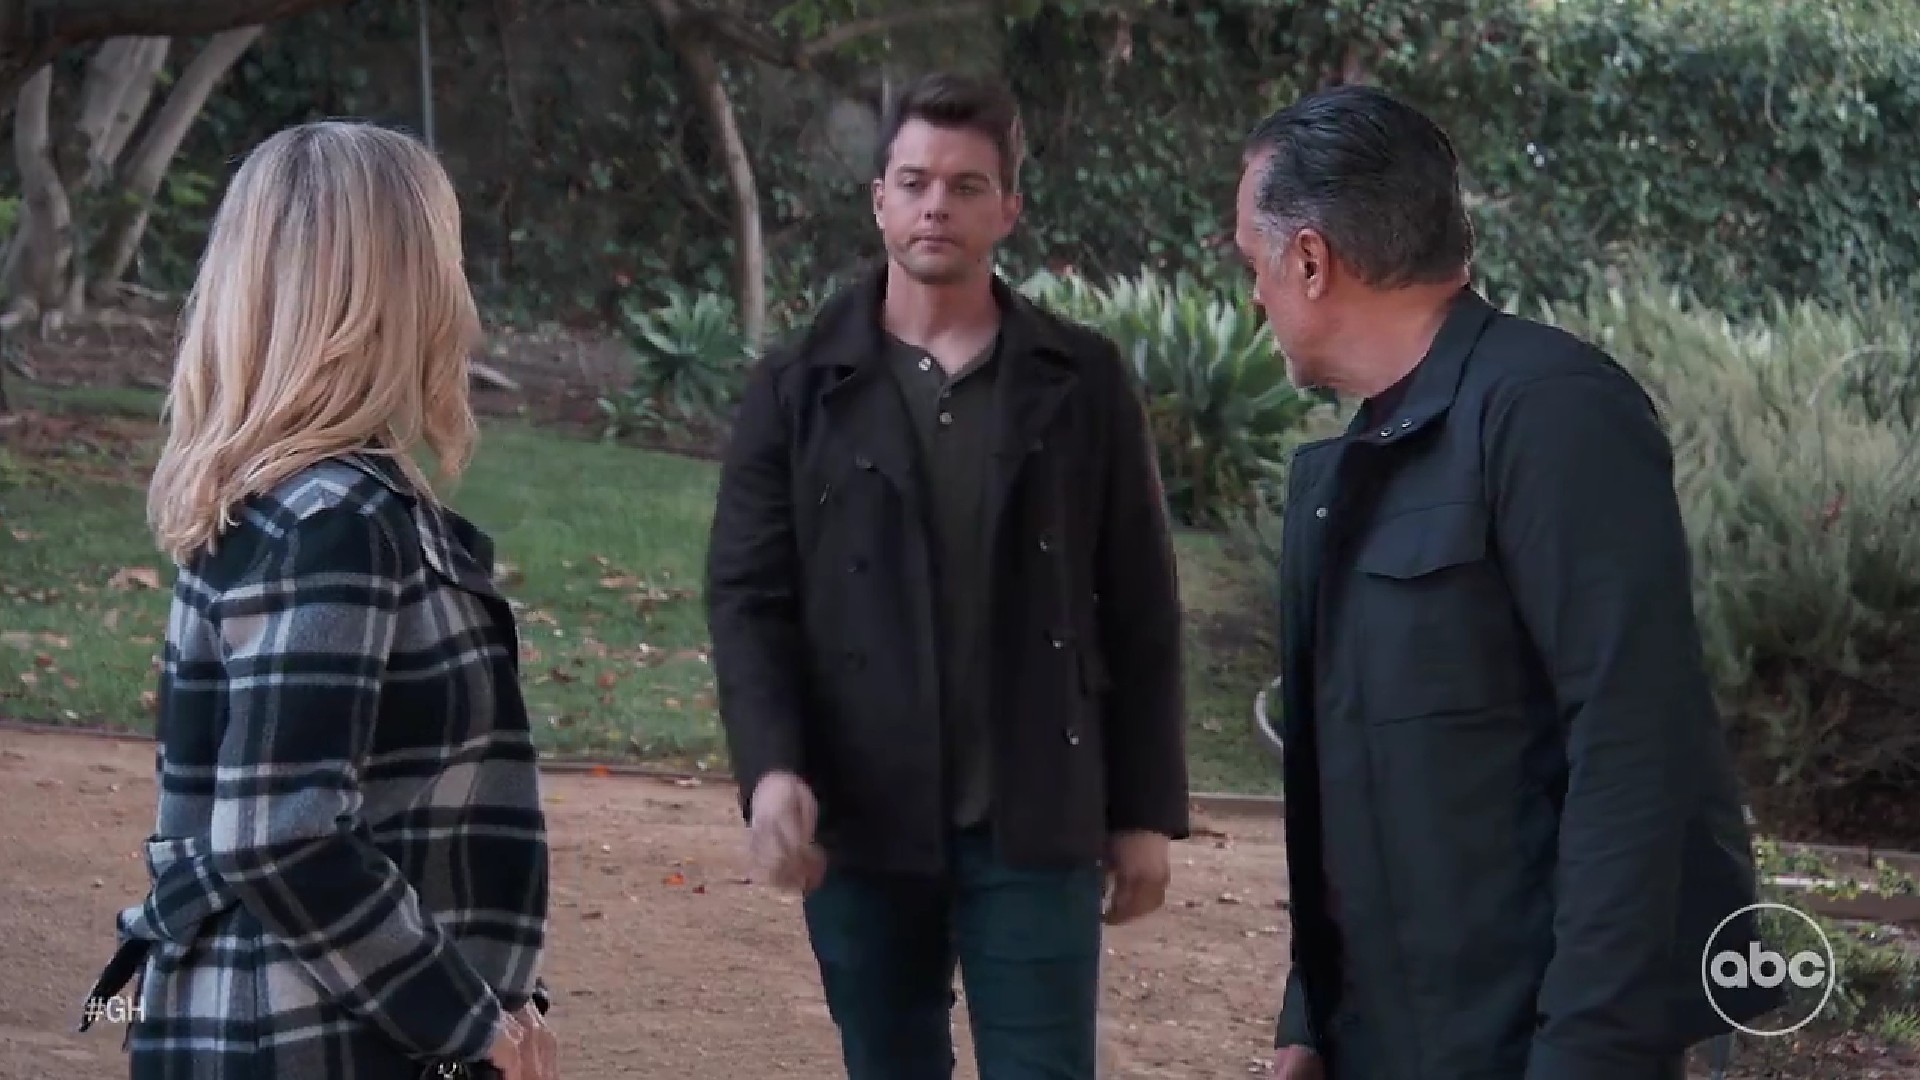 GH/Michael (Chad Duell) confronts Nina (Cynthia Watros) and Sonny (Maurice Benard) on what they are hiding from him